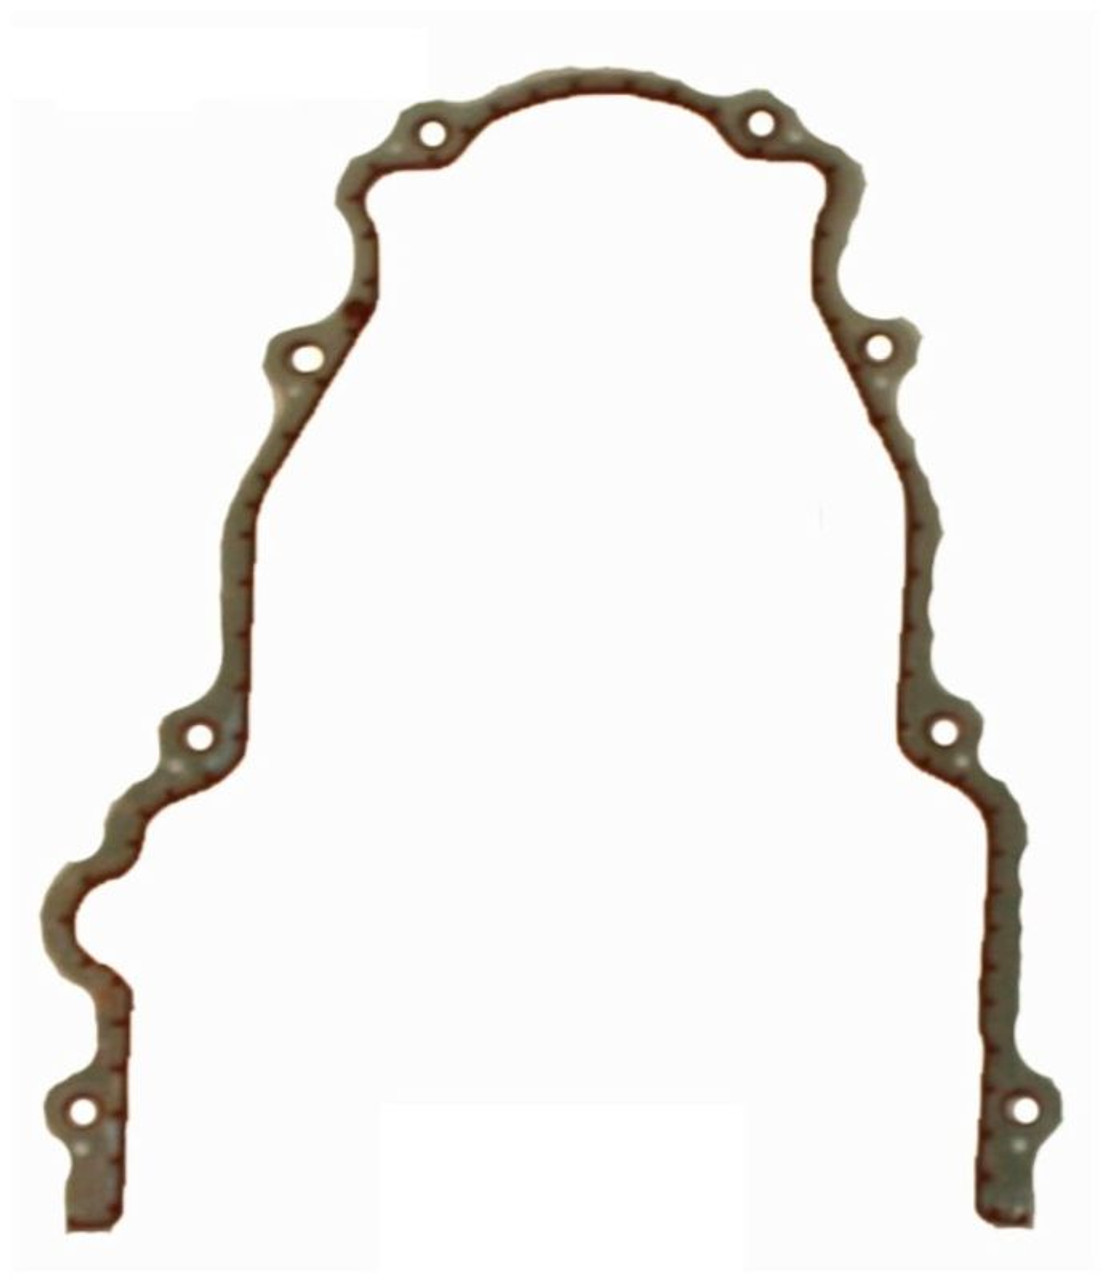 2001 Chevrolet Suburban 1500 5.3L Engine Timing Cover Gasket TCG293-A -45